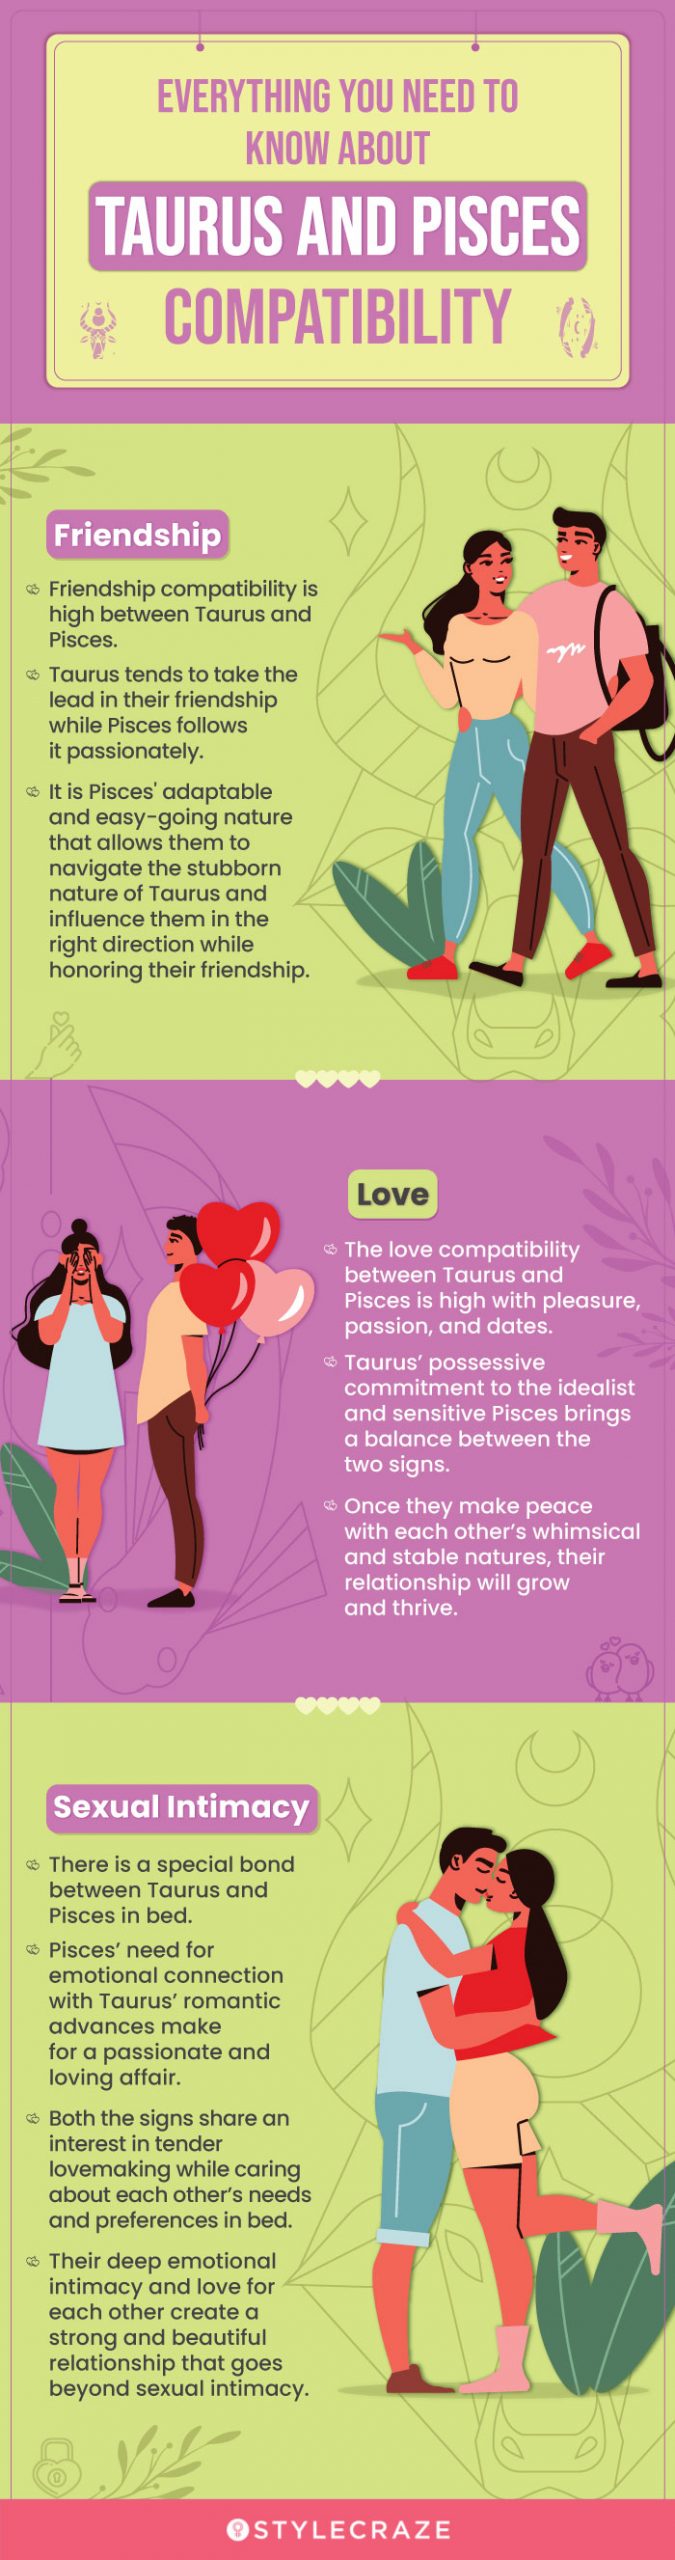 everything you need to know about taurus and pisces compatibility (infographic)